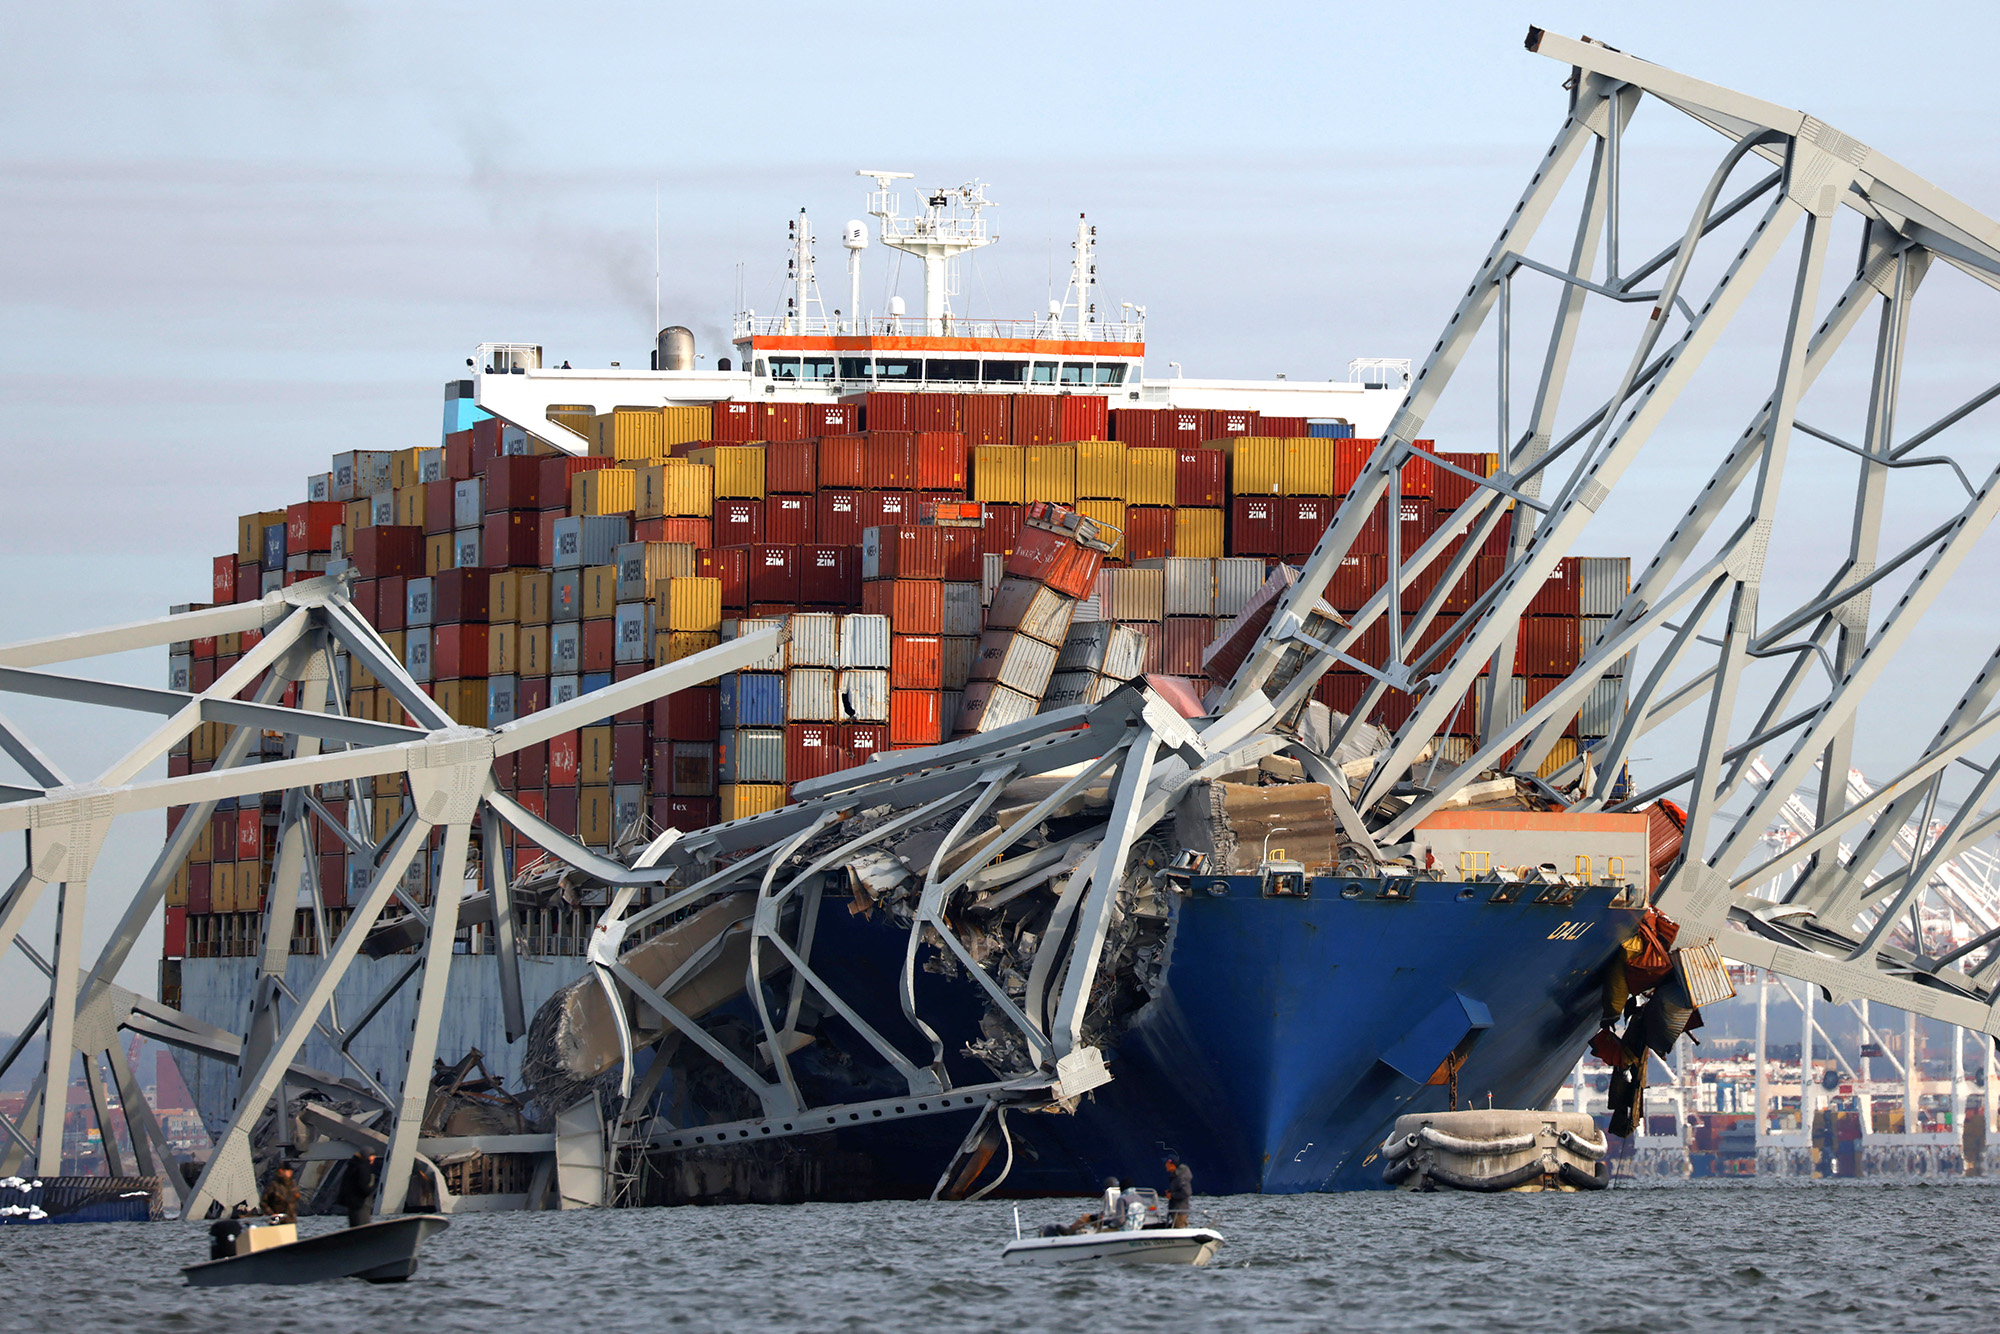 The Dali cargo vessel which crashed into the Francis Scott Key Bridge causing it to collapse in Baltimore, Maryland, on March 26.